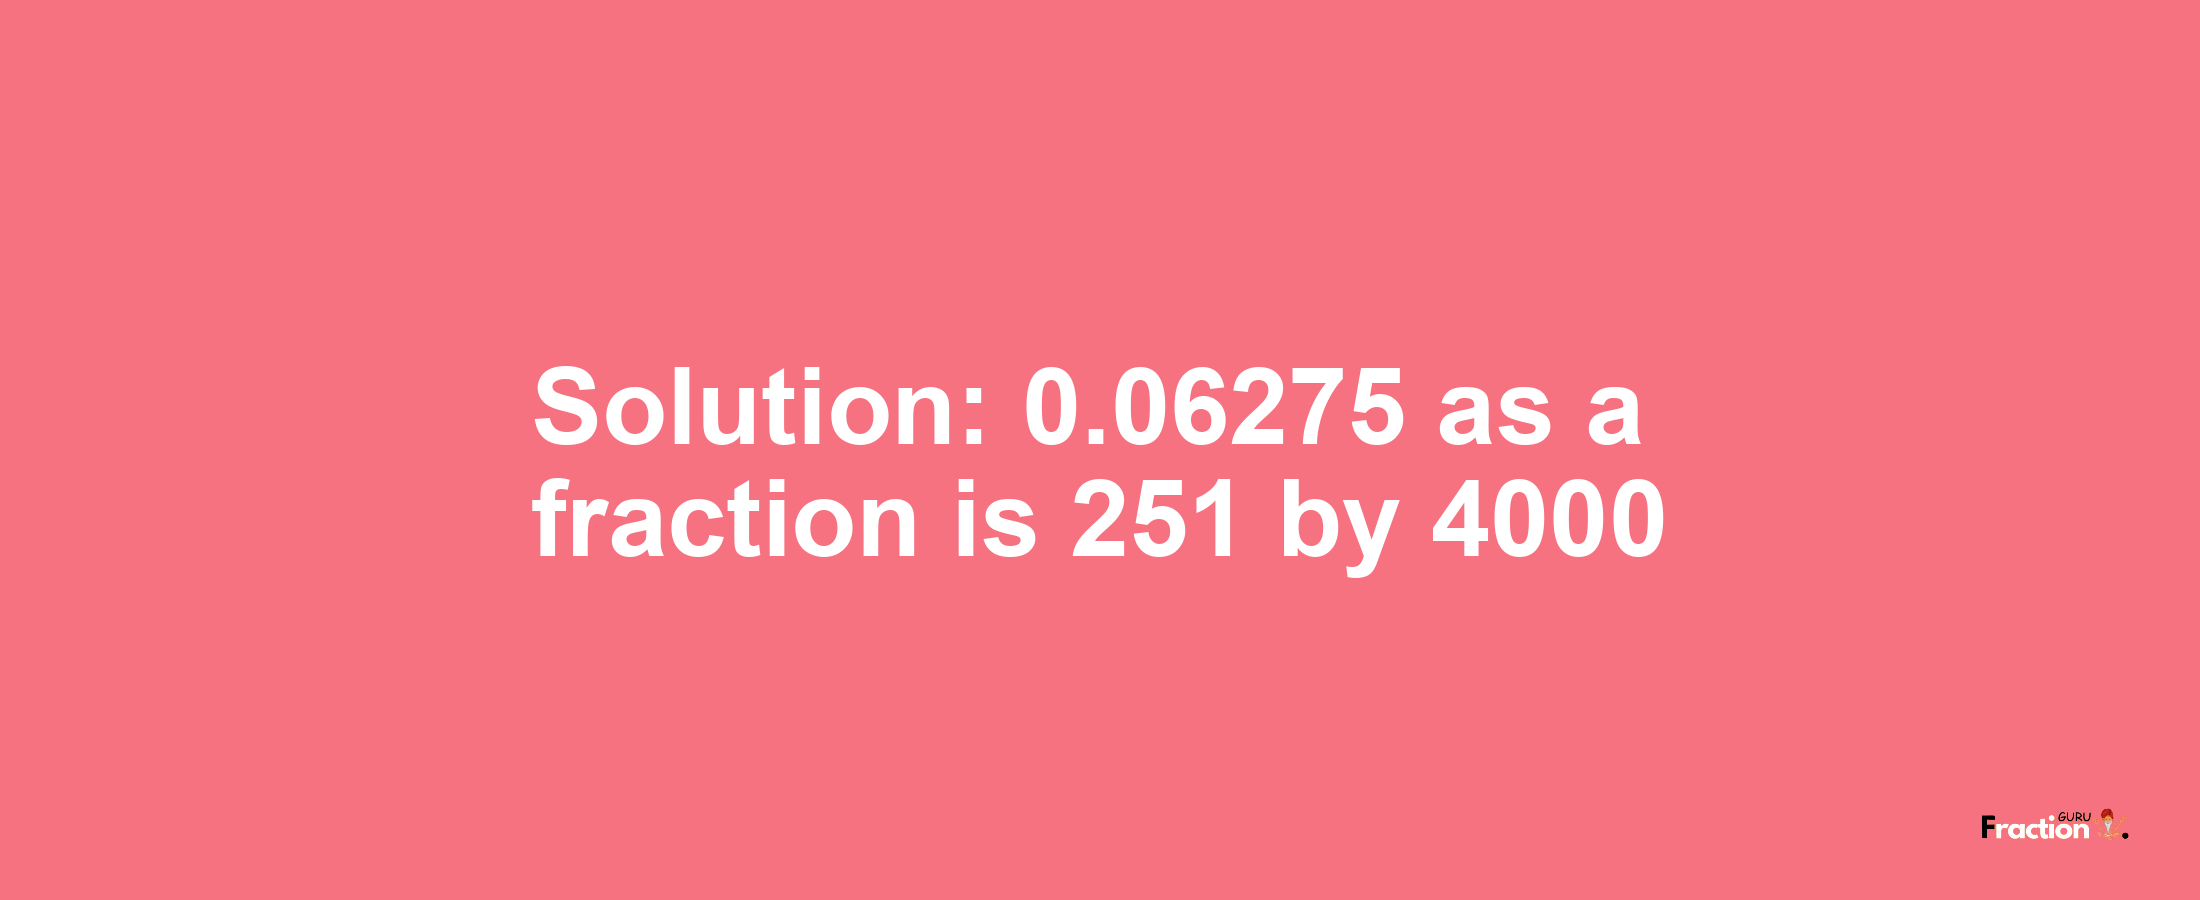 Solution:0.06275 as a fraction is 251/4000